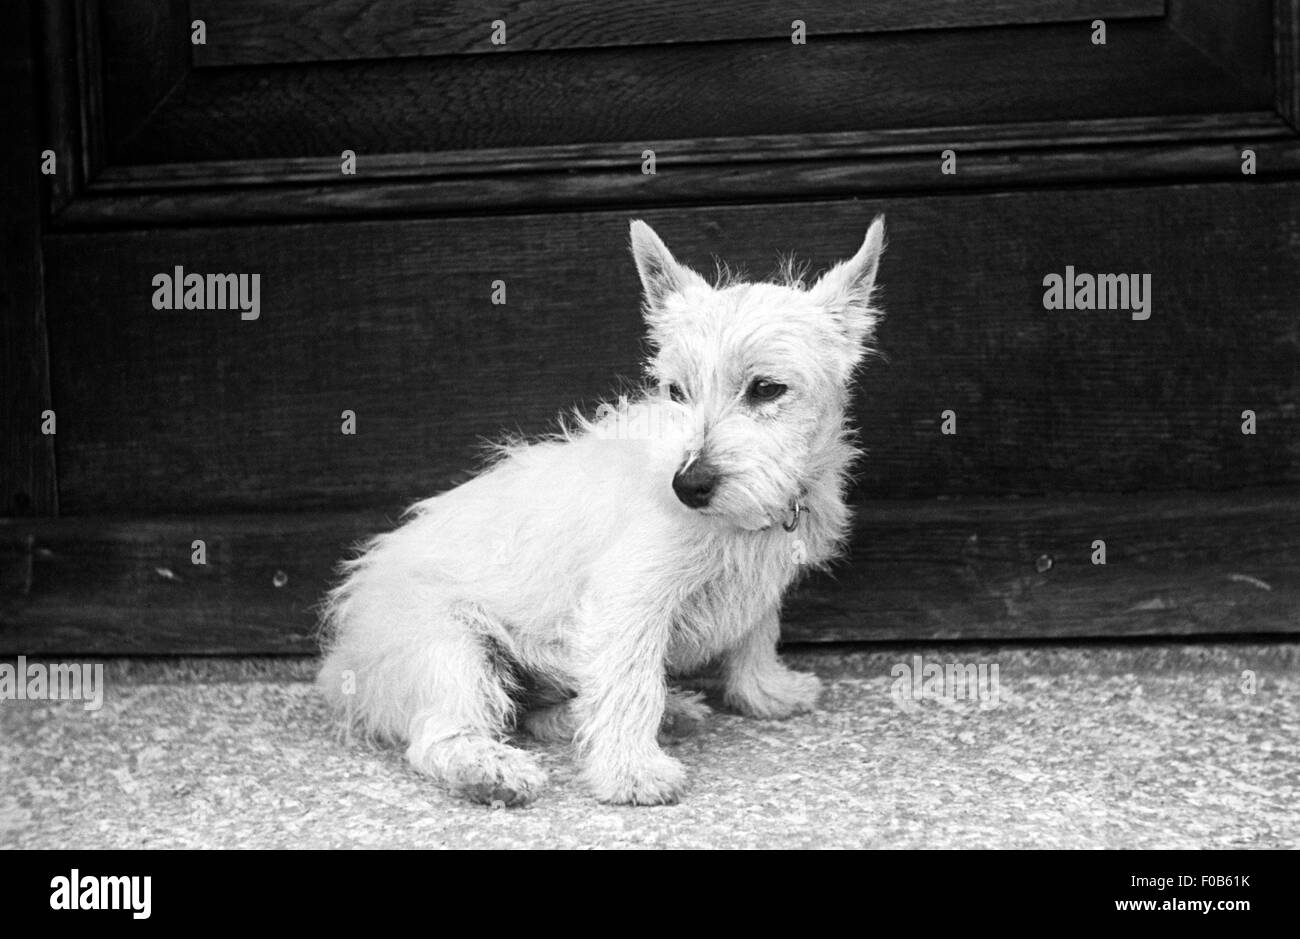 West Highland Terrier dog outside a house Stock Photo